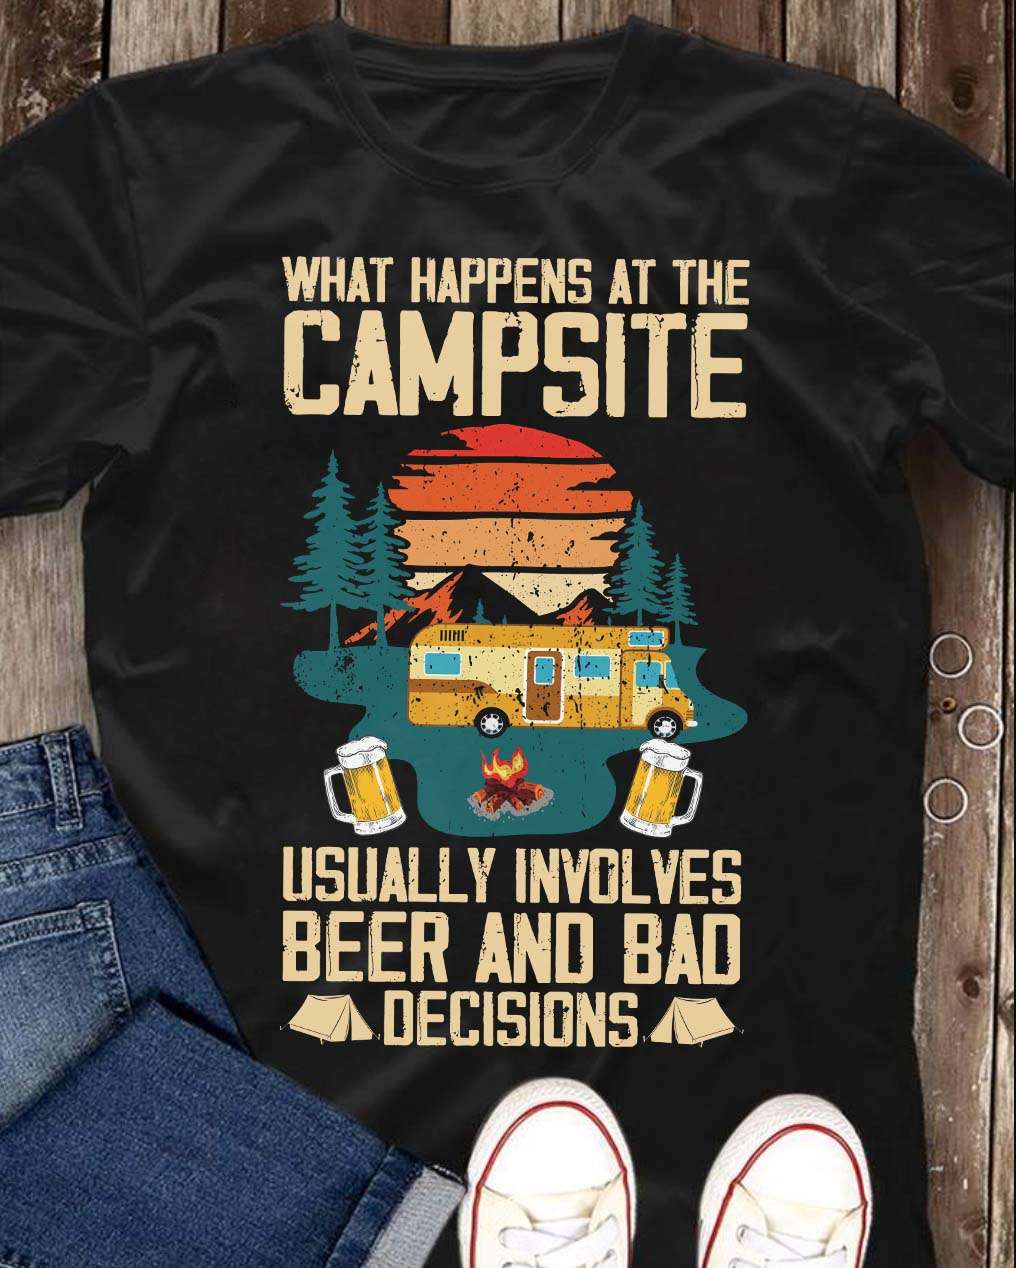 What happens at the campsite usually involves beer and bad decisions ...